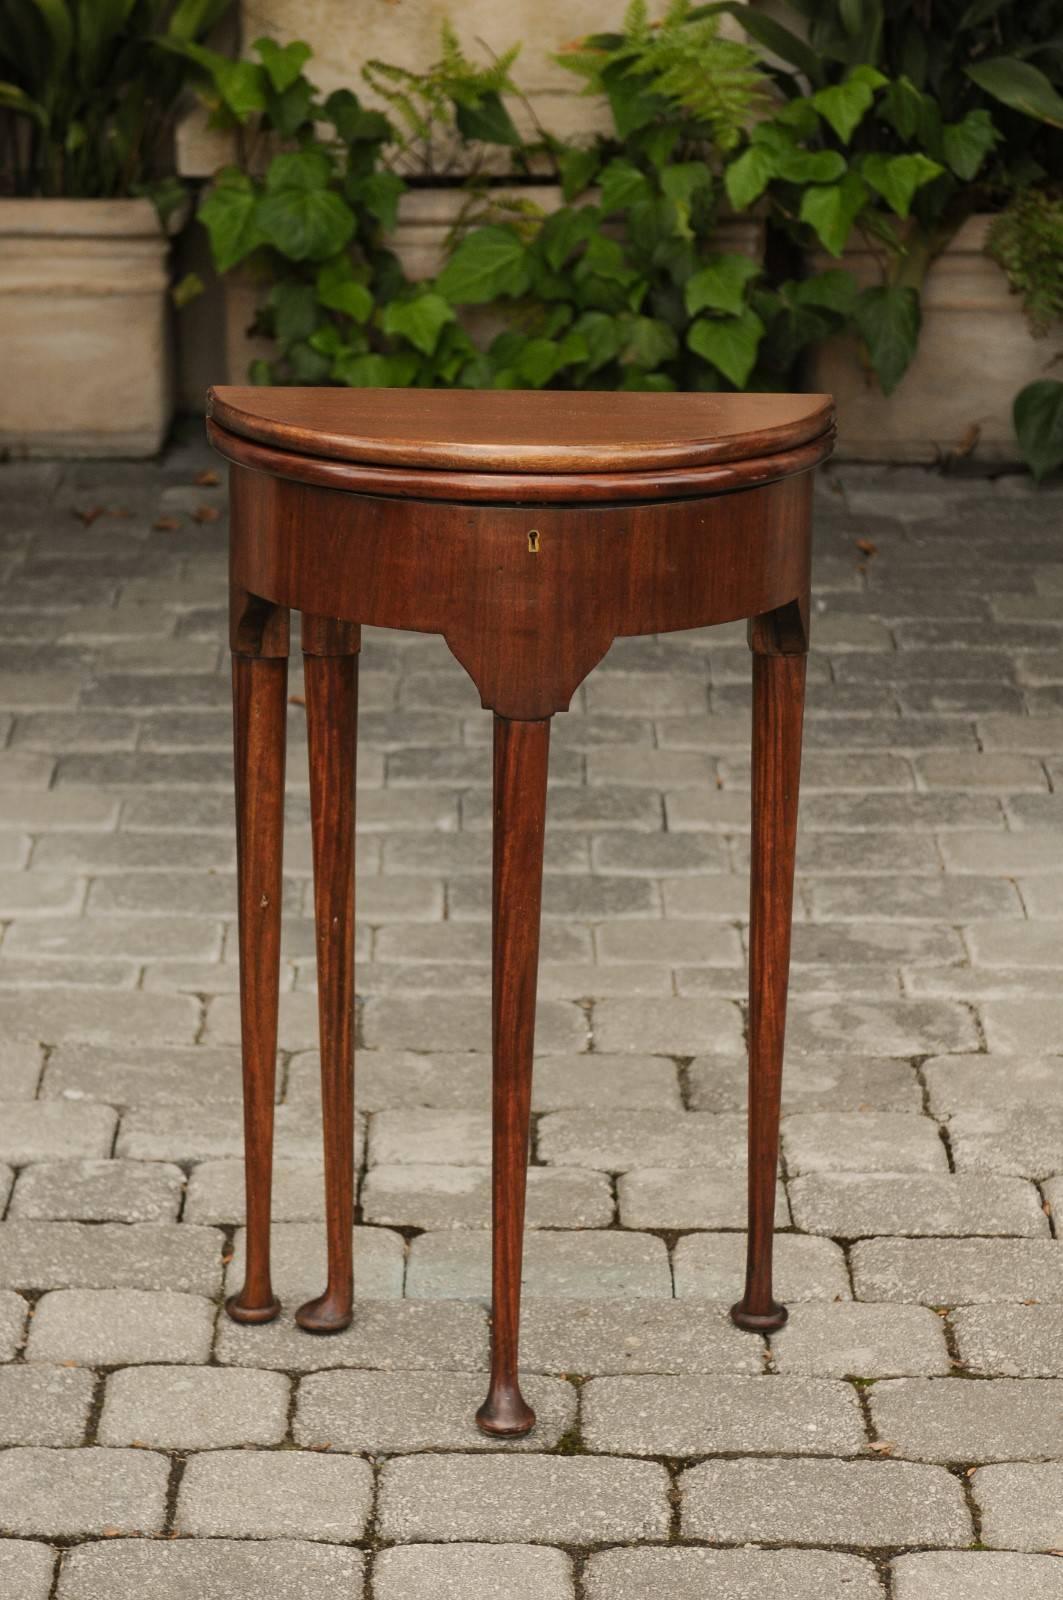 An English George III style petite mahogany demilune table from the mid-19th century, with lift top, storage area and pad feet. This English mahogany demilune table features a semi-circular top with rounded edges, that opens to double as a round